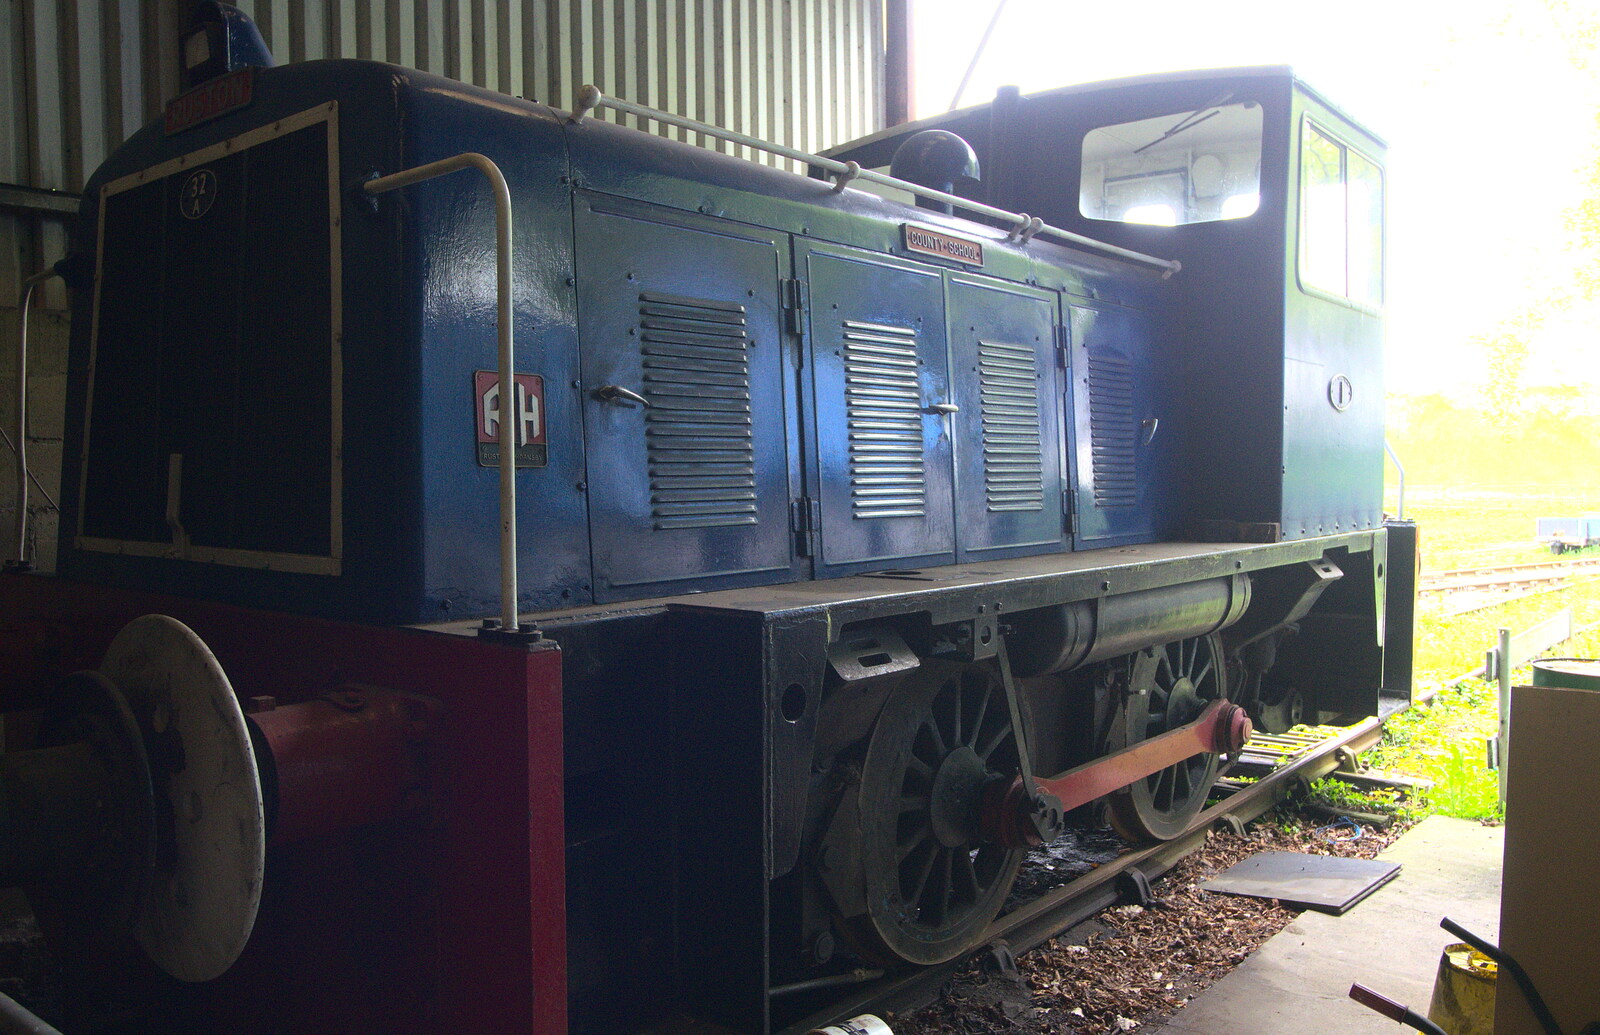 An old shunting engine from A Day at Bressingham Steam and Gardens, Diss, Norfolk - 18th May 2013